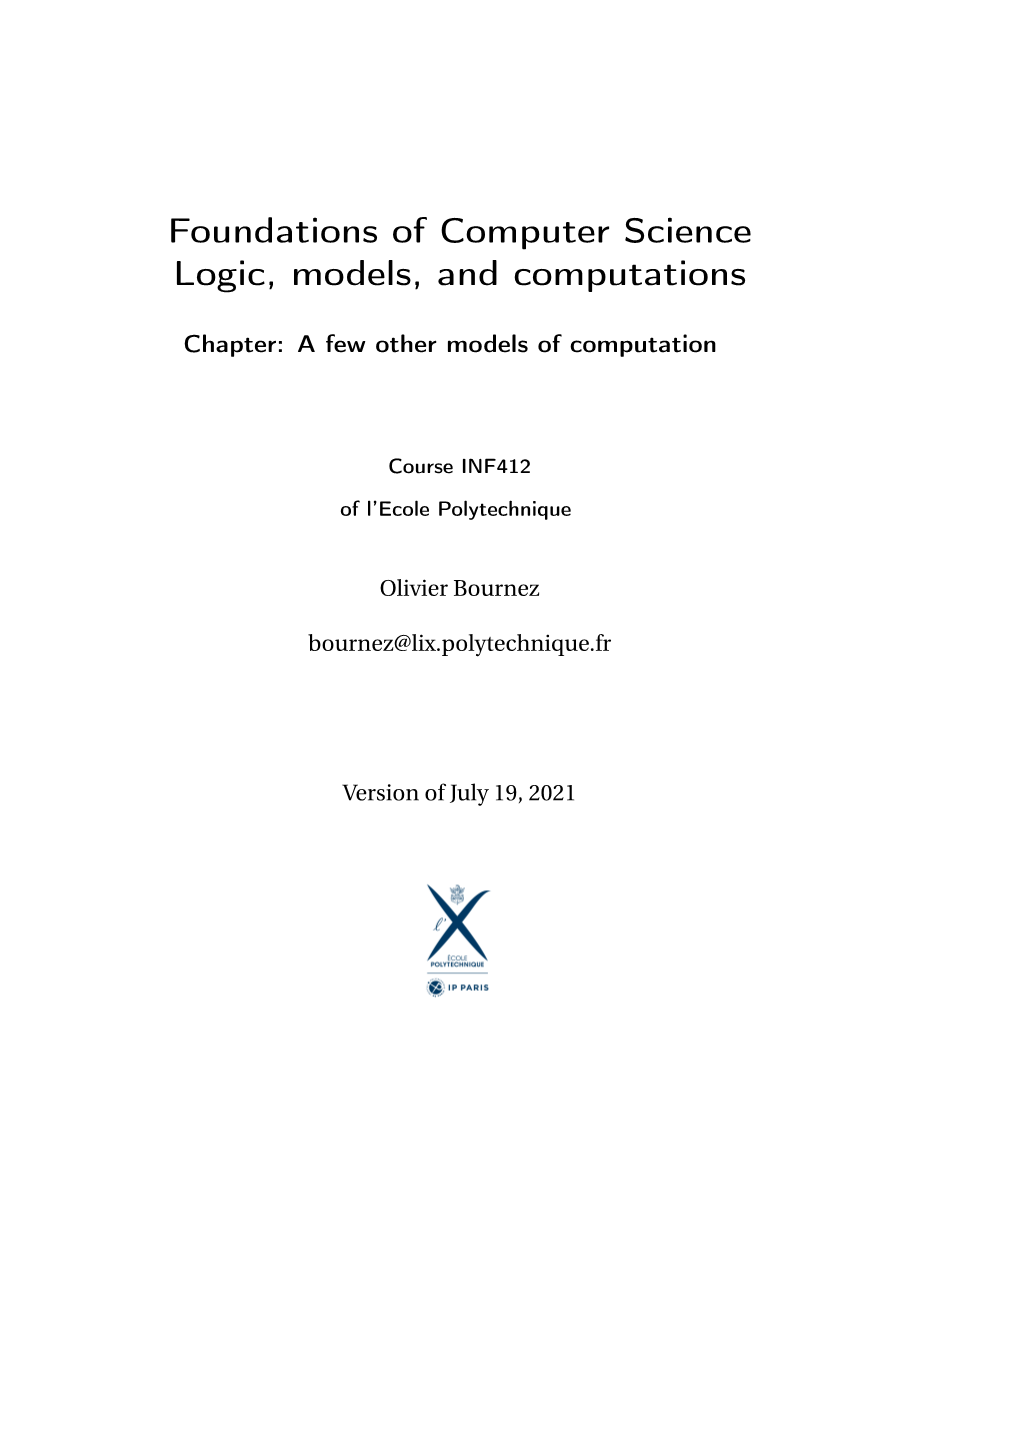 Foundations of Computer Science Logic, Models, and Computations